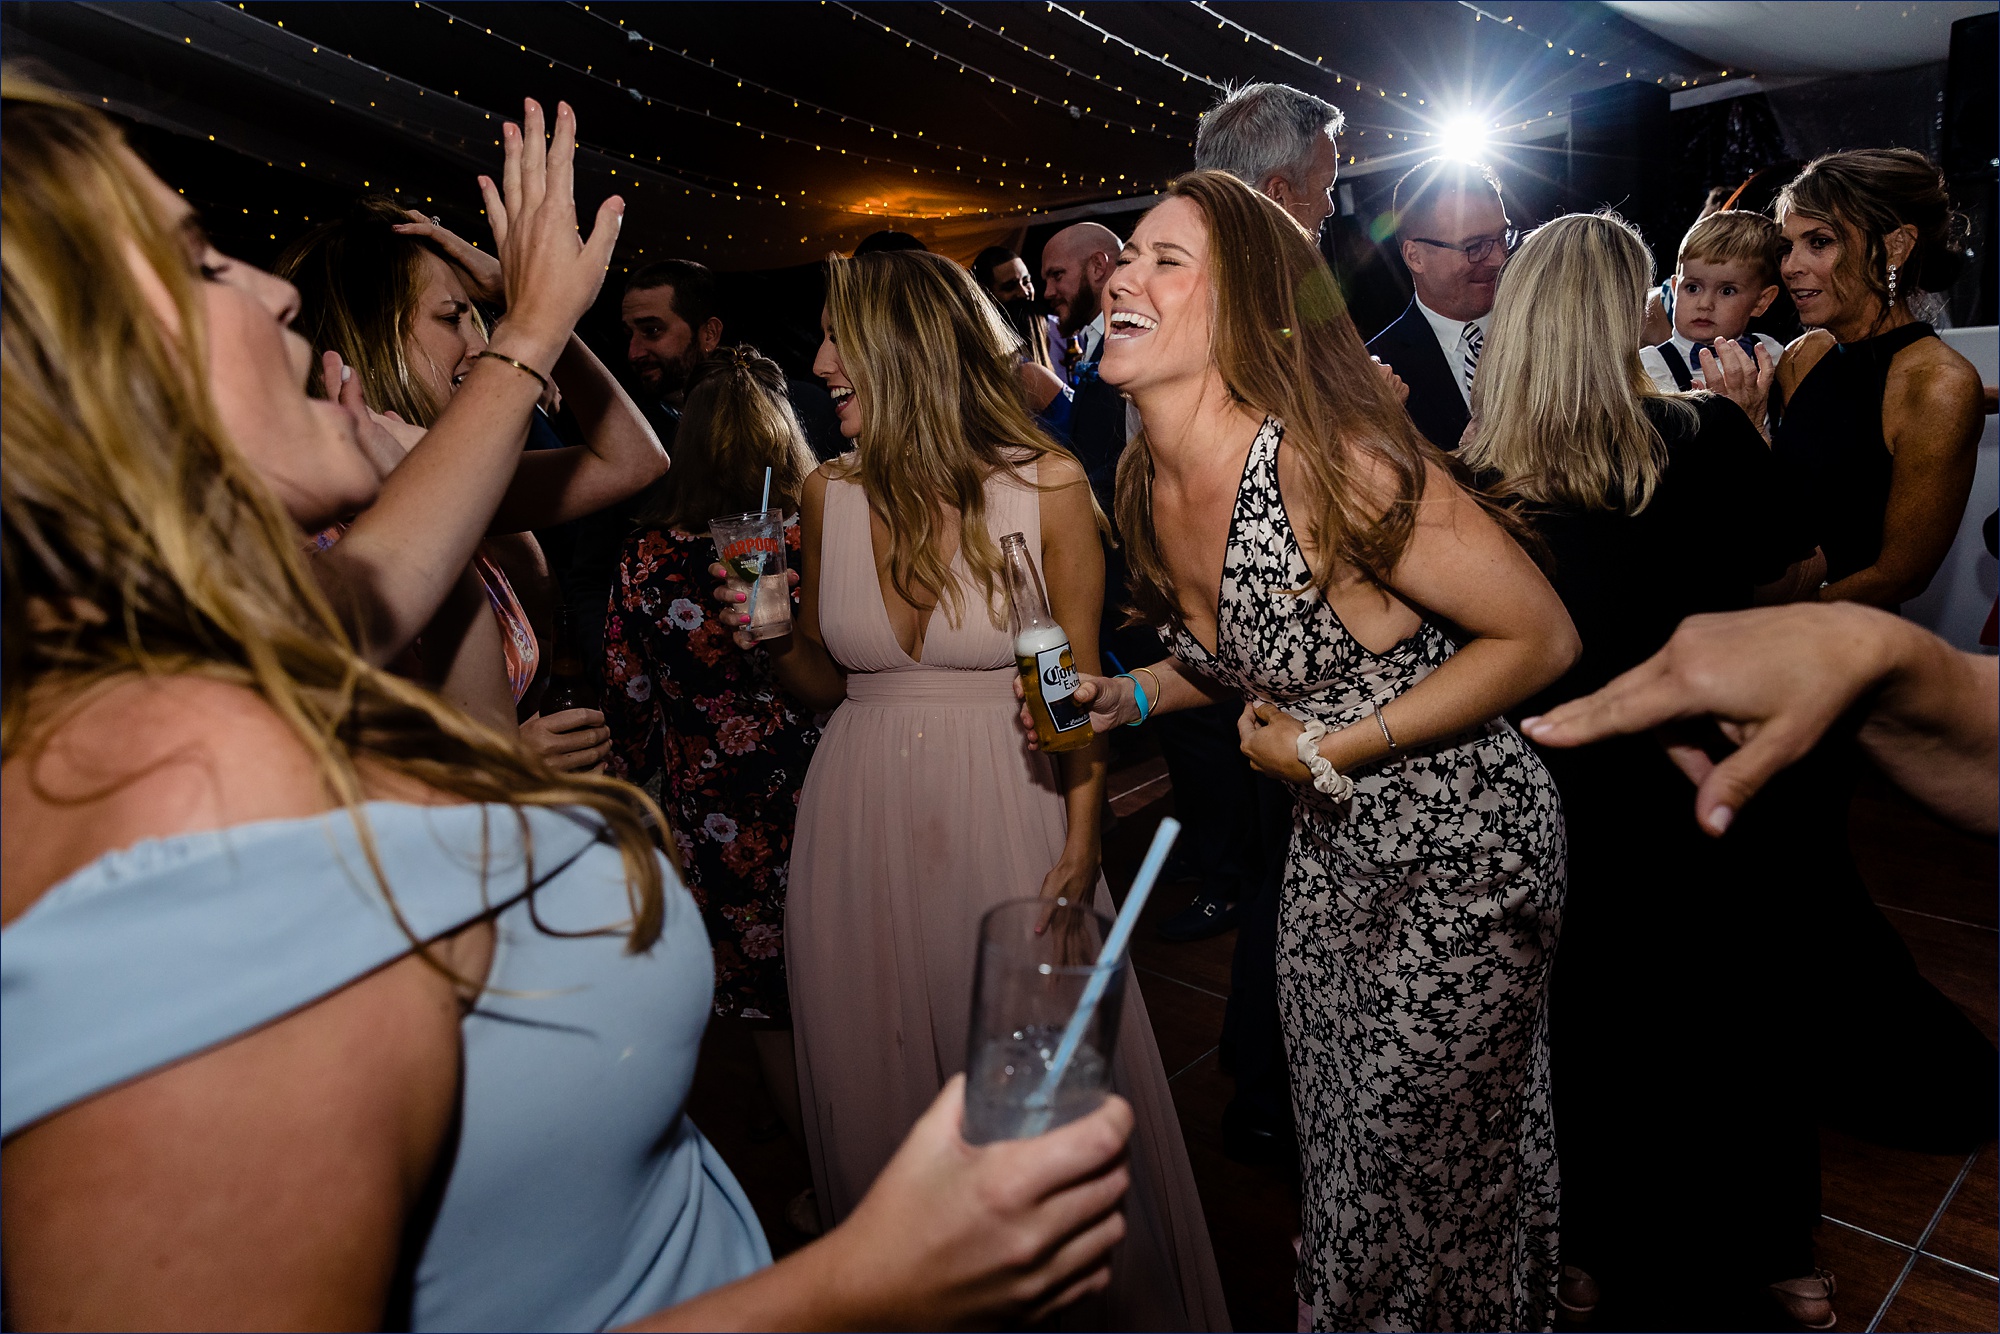 Guests get the party rolling on the dance floor at the wedding reception